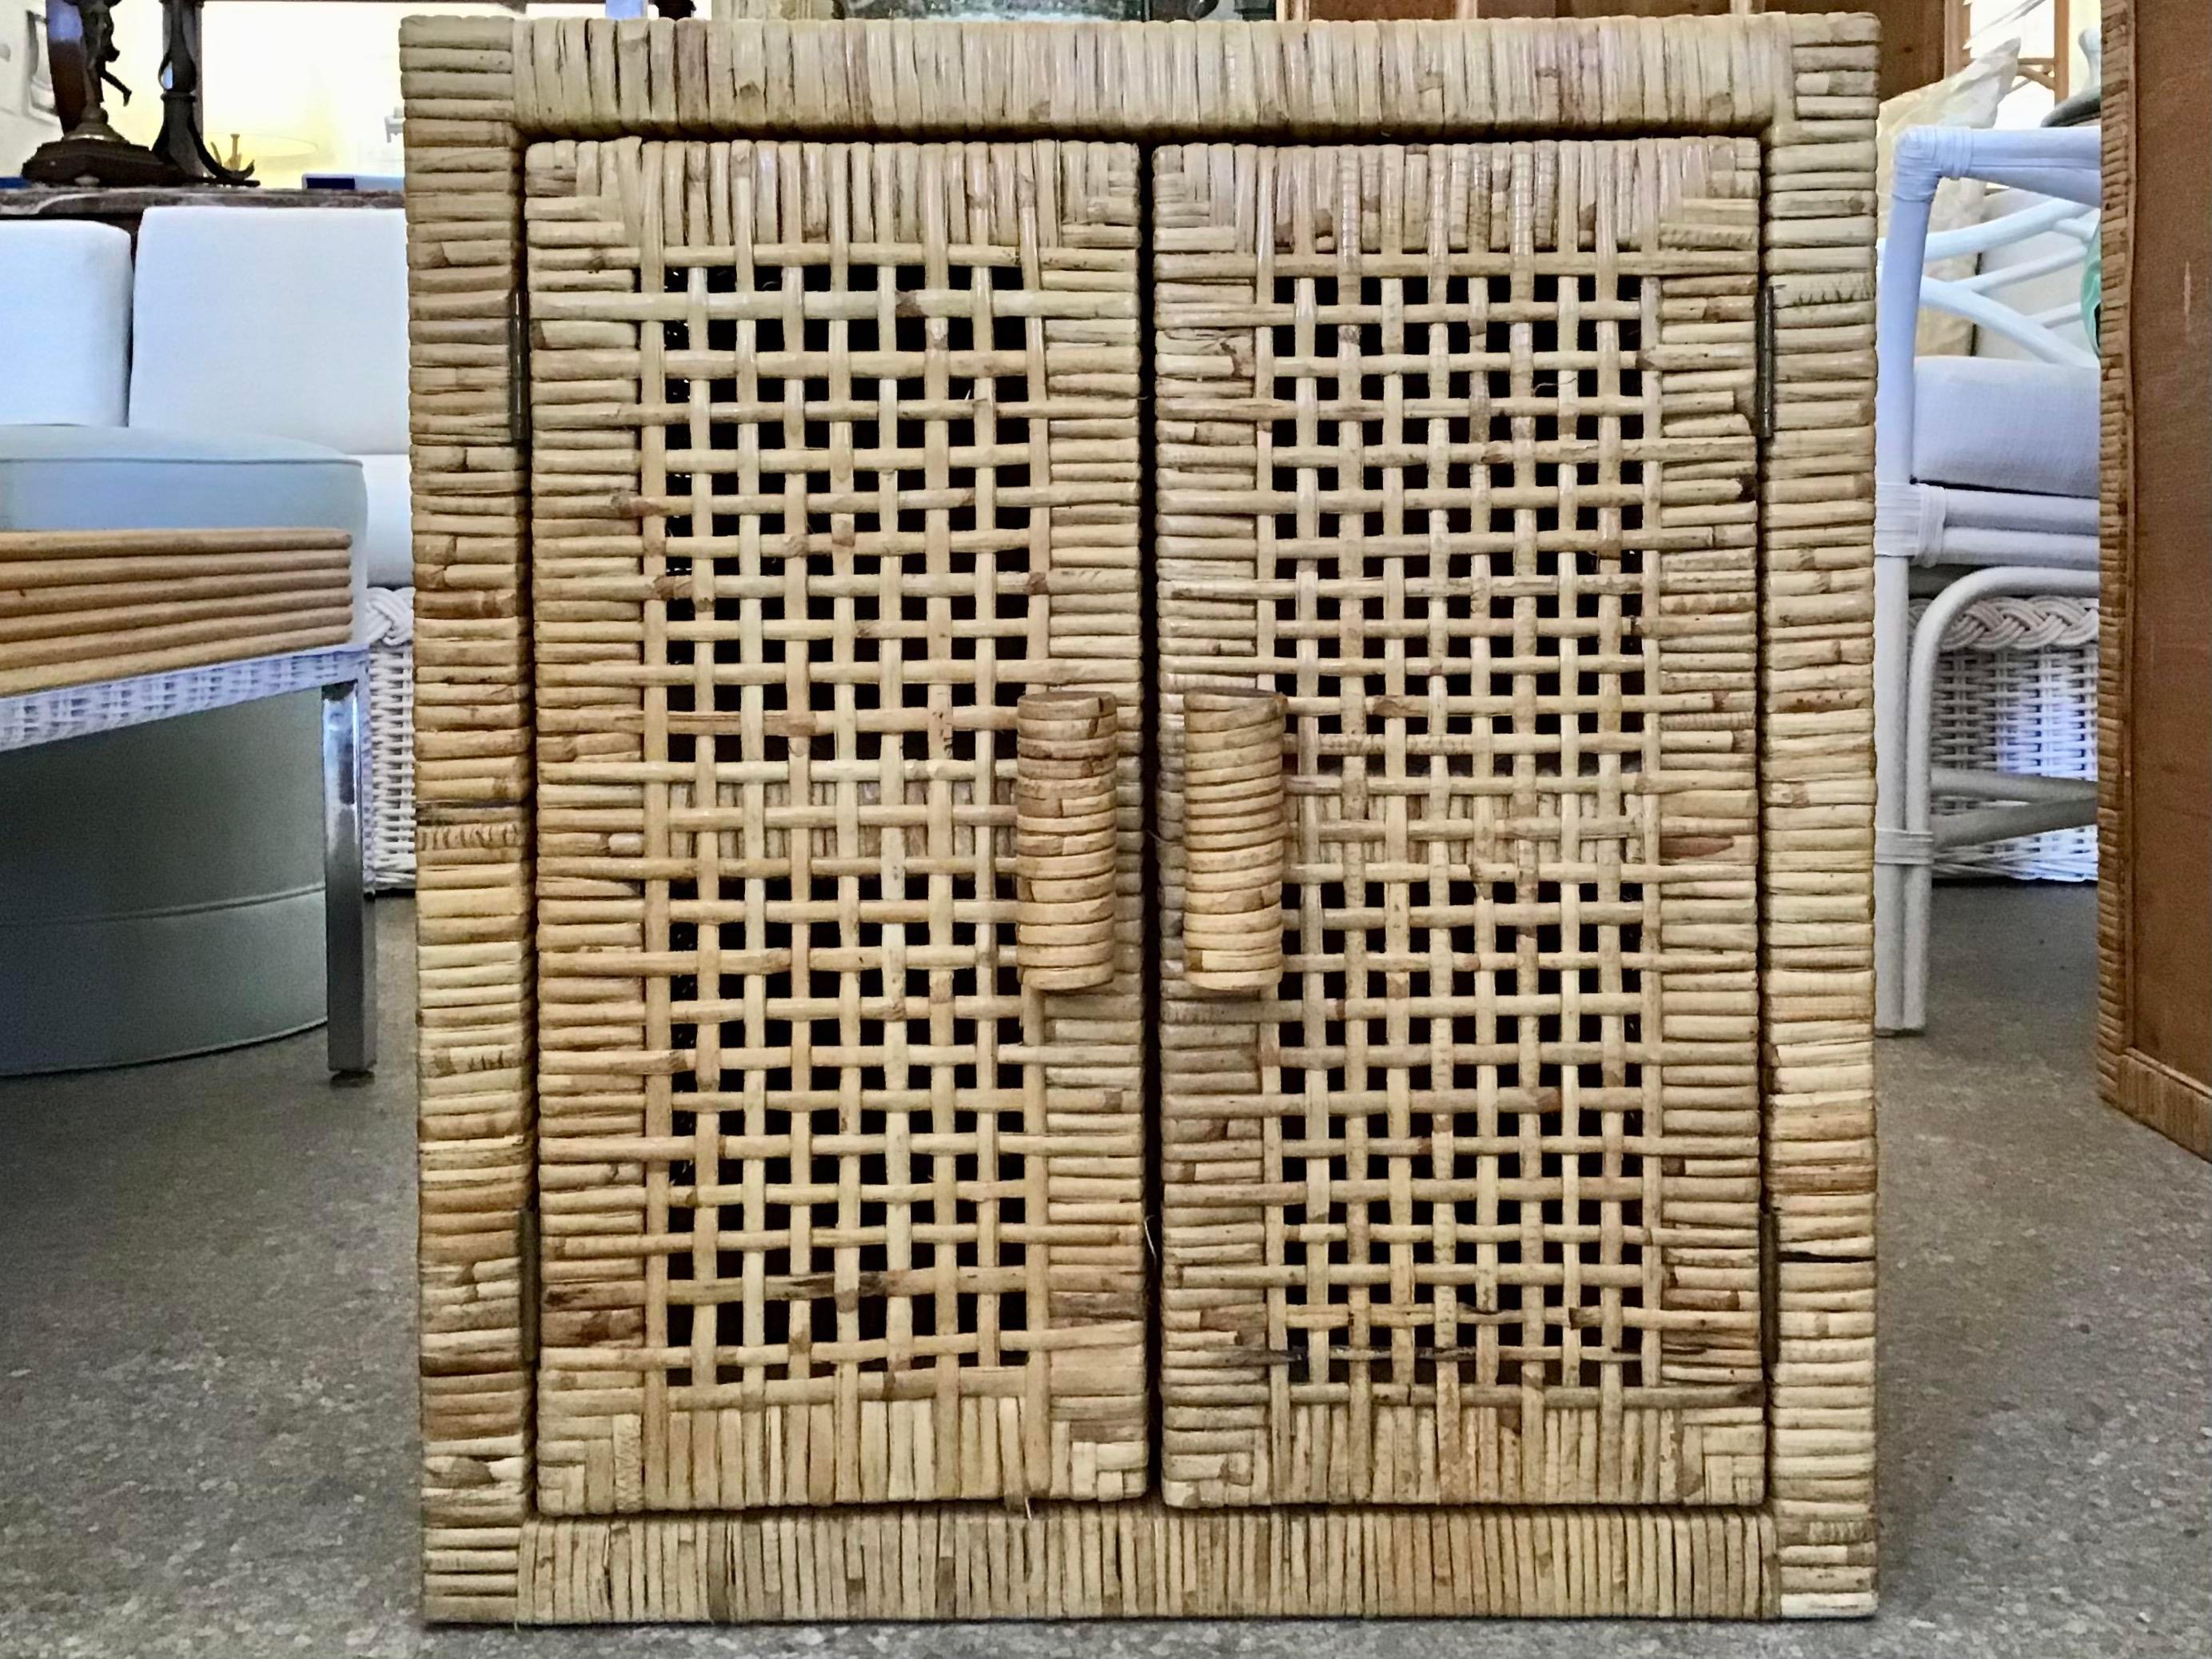 Fabulous small Bielecky brothers boho chic rattan two door cabinet with shelf. This is a great addition to your bar and kitchen for great storage and decor.